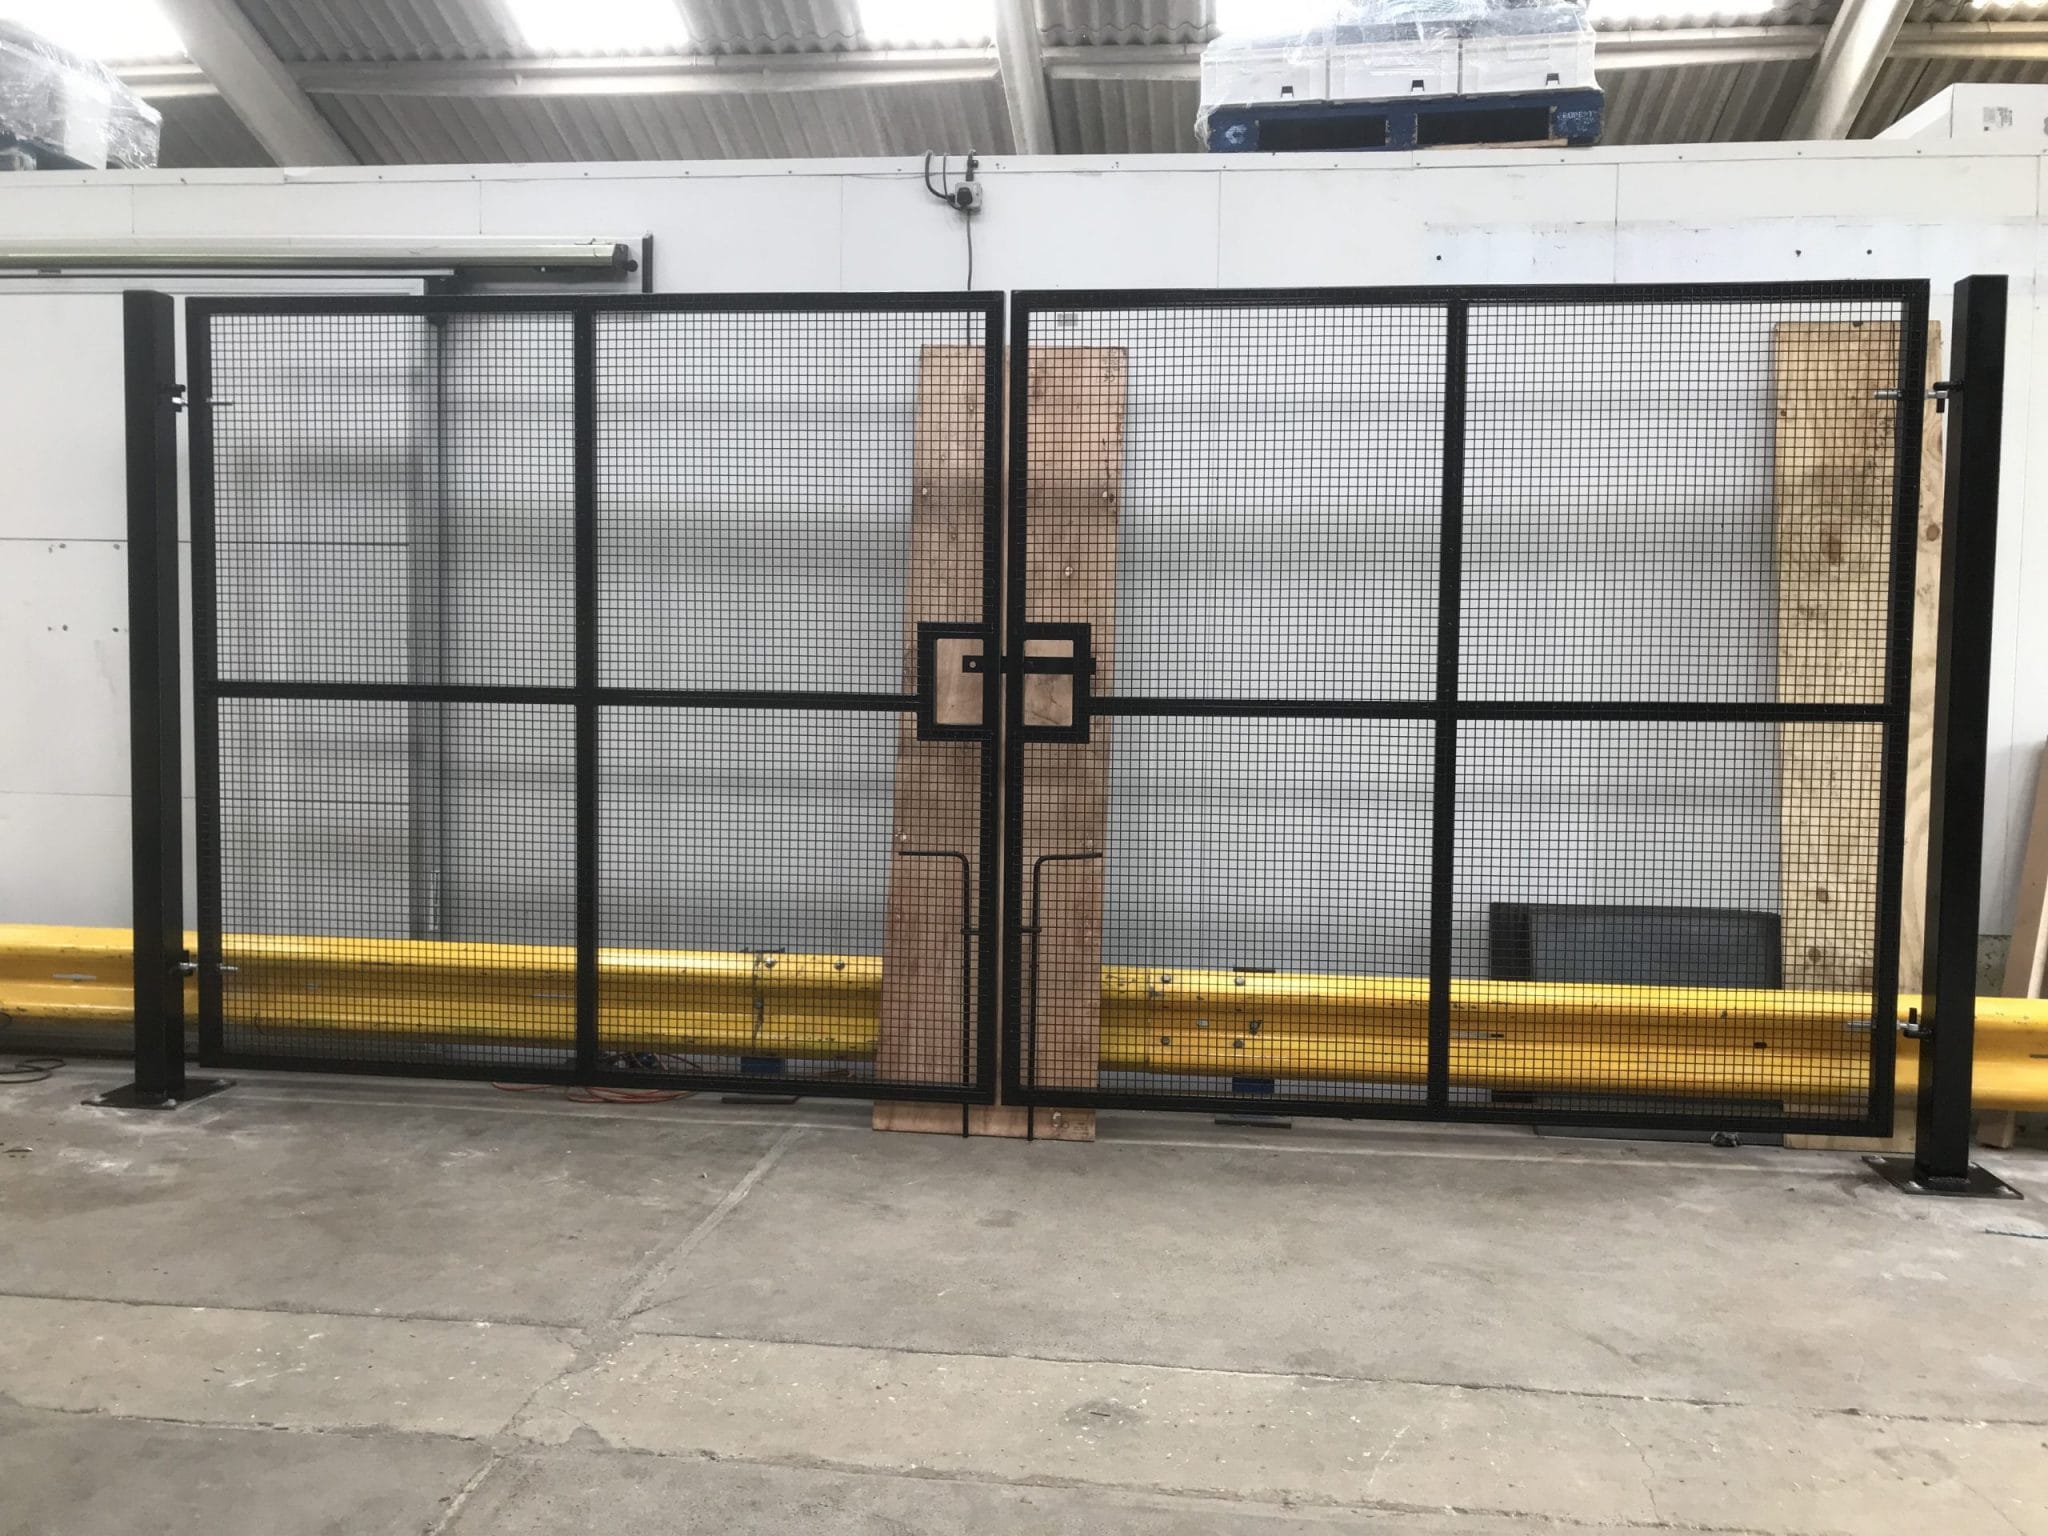 Mesh Gates for use in Hoarding applications.